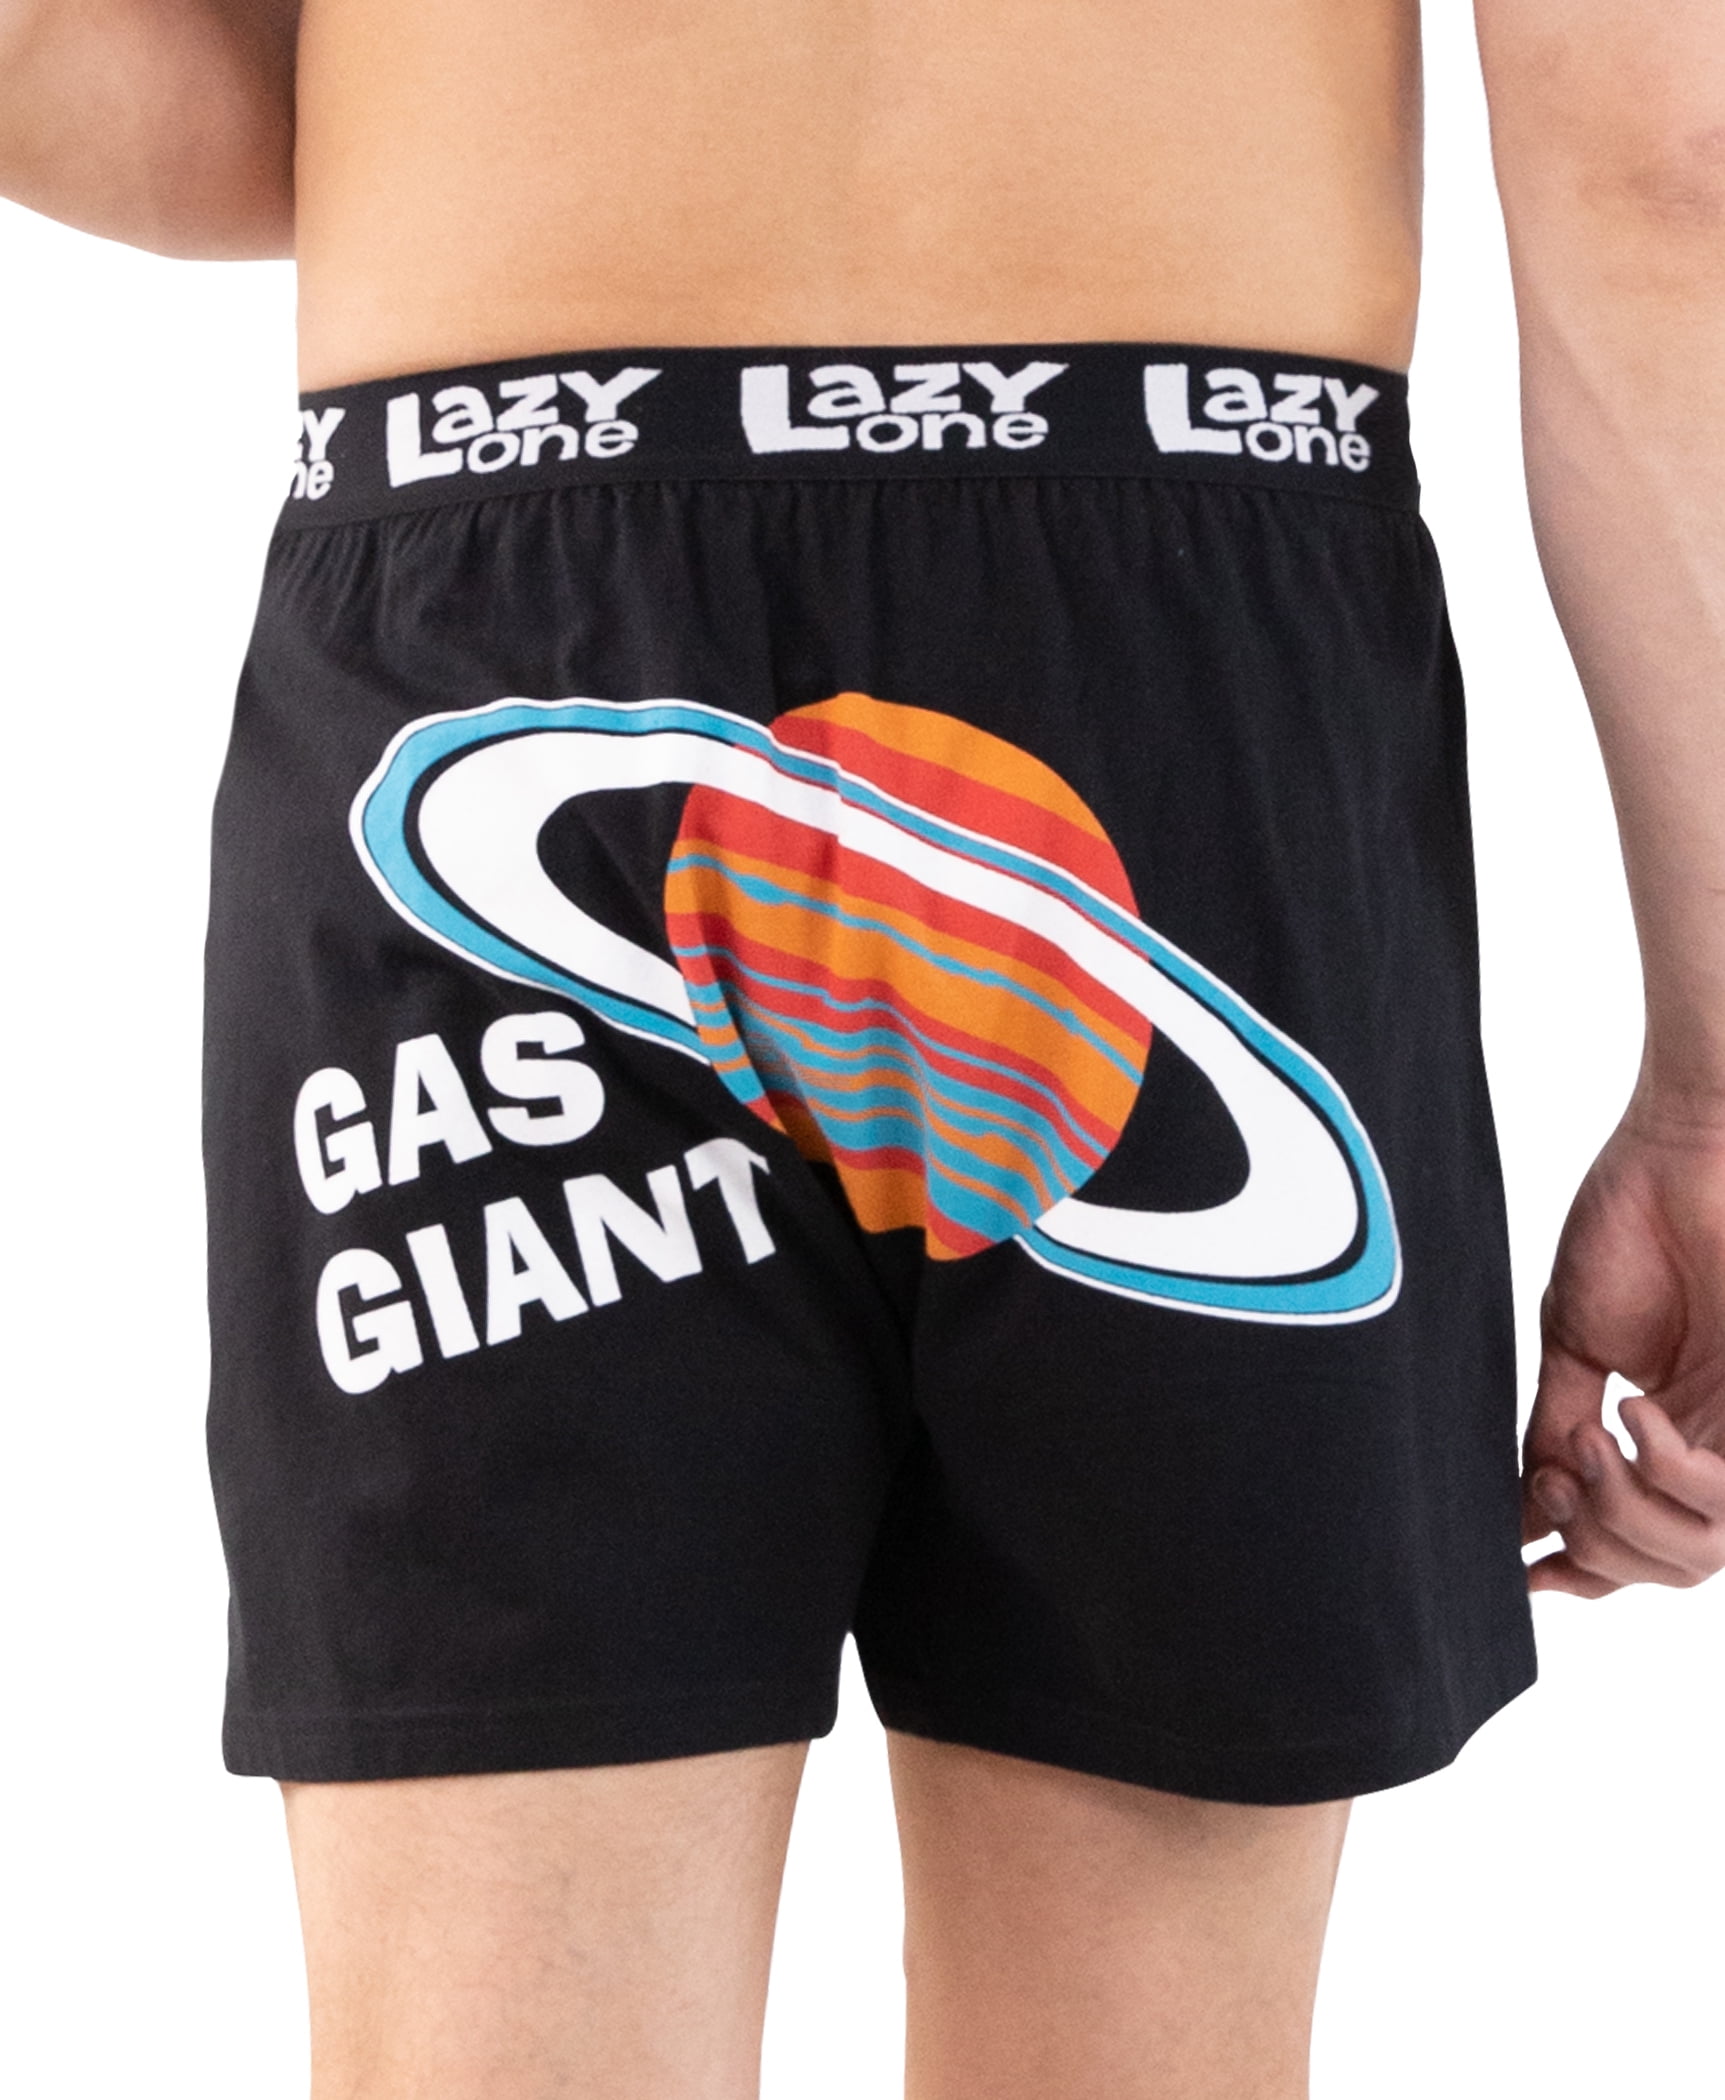 Novelty Boxer Shorts Gag Gifts for Men Lazy One Funny Boxers Humorous Underwear 